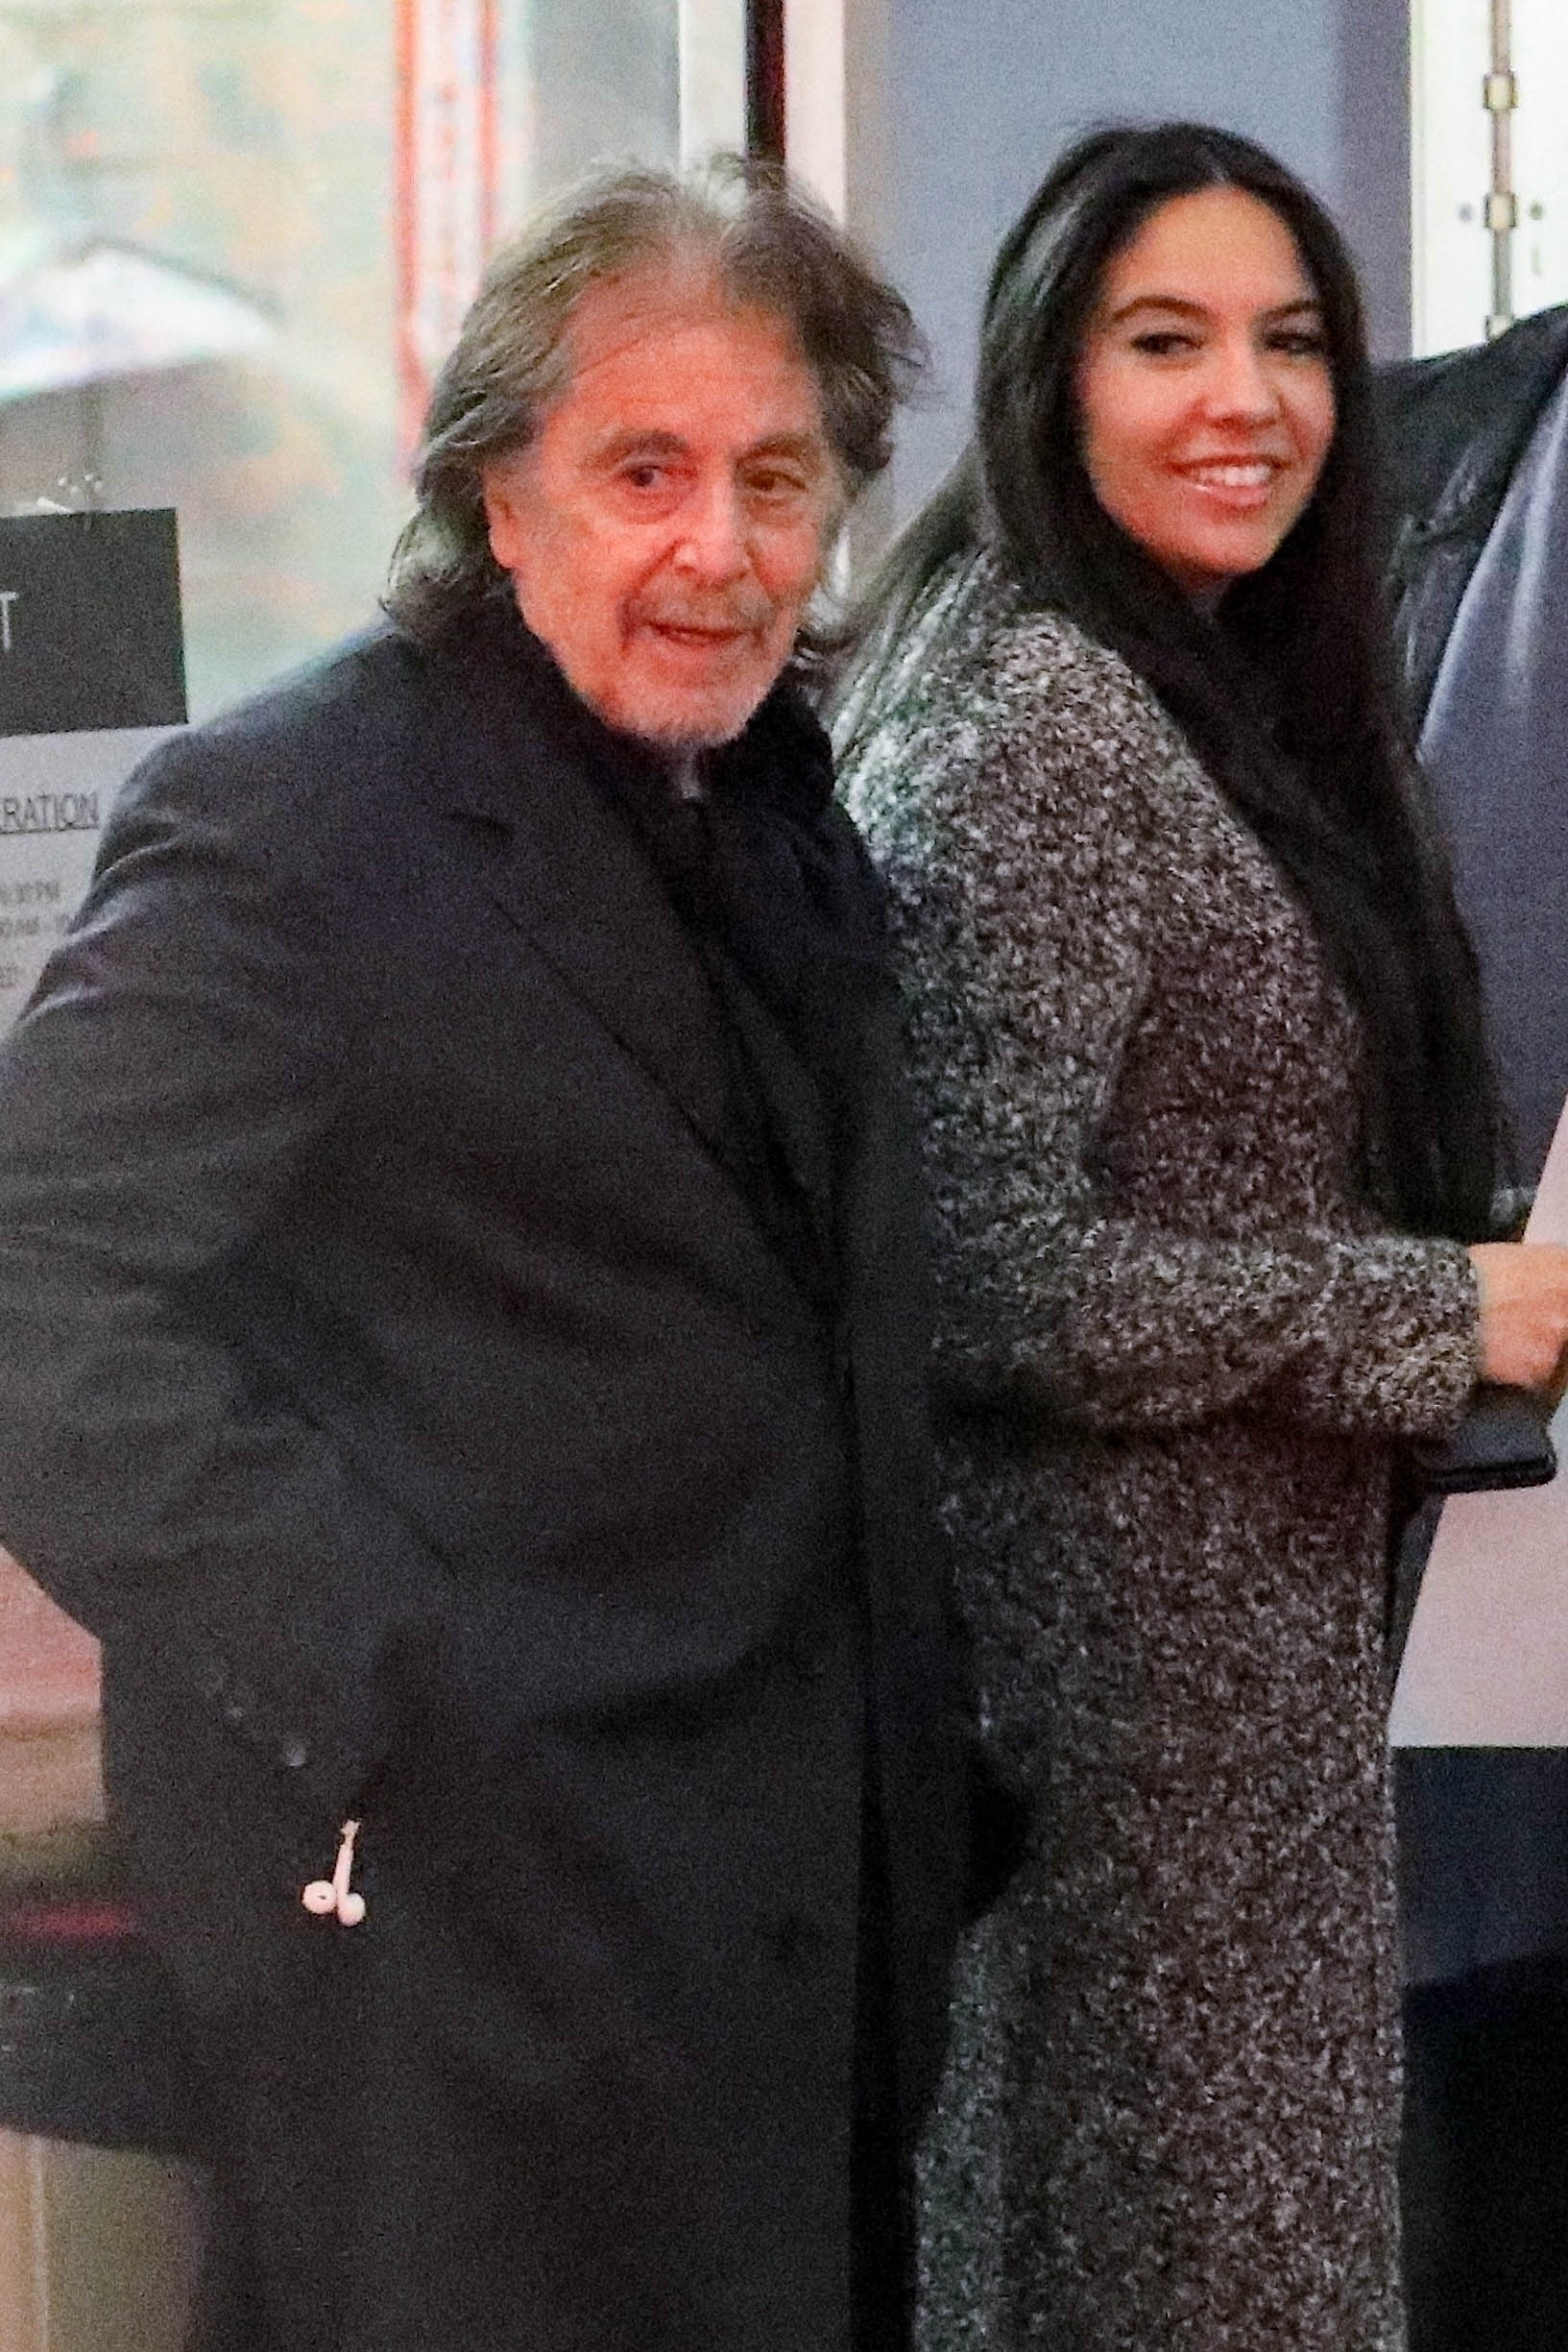 <p><span>In April 2022, </span><a href="https://pagesix.com/2022/04/13/al-pacino-seeing-girlfriend-for-some-time-despite-53-year-age-gap/">Page Six</a><span> reported that a then 81-year-old Al Pacino had</span><a href="https://www.wonderwall.com/celebrity/couples/tk-plus-more-celeb-love-news-585925.gallery"> started dating</a><span> Rolling Stones frontman Mick Jagger's </span><a href="https://www.wonderwall.com/news/mick-jagger-reportedly-dating-22-year-old-noor-alfallah-3010346.article">ex-girlfriend</a><span>, socialite and film producer Noor Alfallah -- who was 28 at the time the news broke -- sometime "during the pandemic." "She mostly dates very rich older men. … She has been with Al for some time and they get on very well," a source told the New York Post's gossip column. "The age gap [of more than 53 years] doesn't seem to be a problem, even though he is older than her father. She moves with the wealthy jet-set crowd, and she comes from a family with money."</span></p><p>In May 2023, the couple made headlines again when Al's rep confirmed that then 29-year-old Noor was eight months pregnant with the then 83-year-old Oscar winner's baby. Their son, Roman Pacino, was born in June 2023.</p>